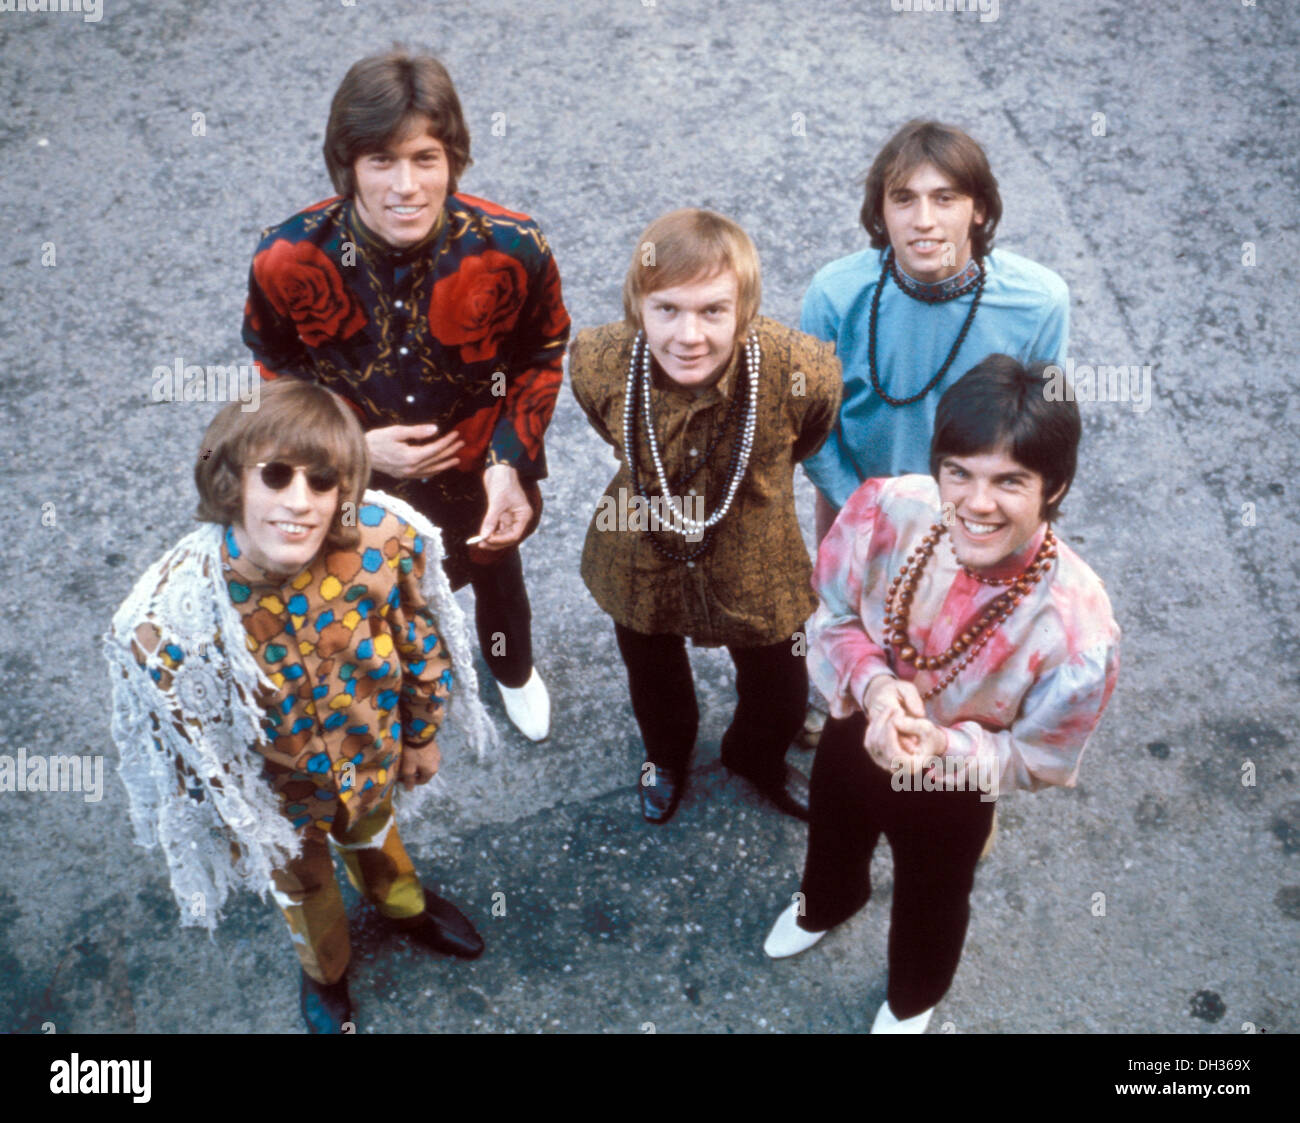 BEE GEES UK pop group in 1967. From left: Robin Gibb,Barry Gibb,Colin Petersen,Maurice Gibb,Vince Melouney. Photo: Tony Gale Stock Photo